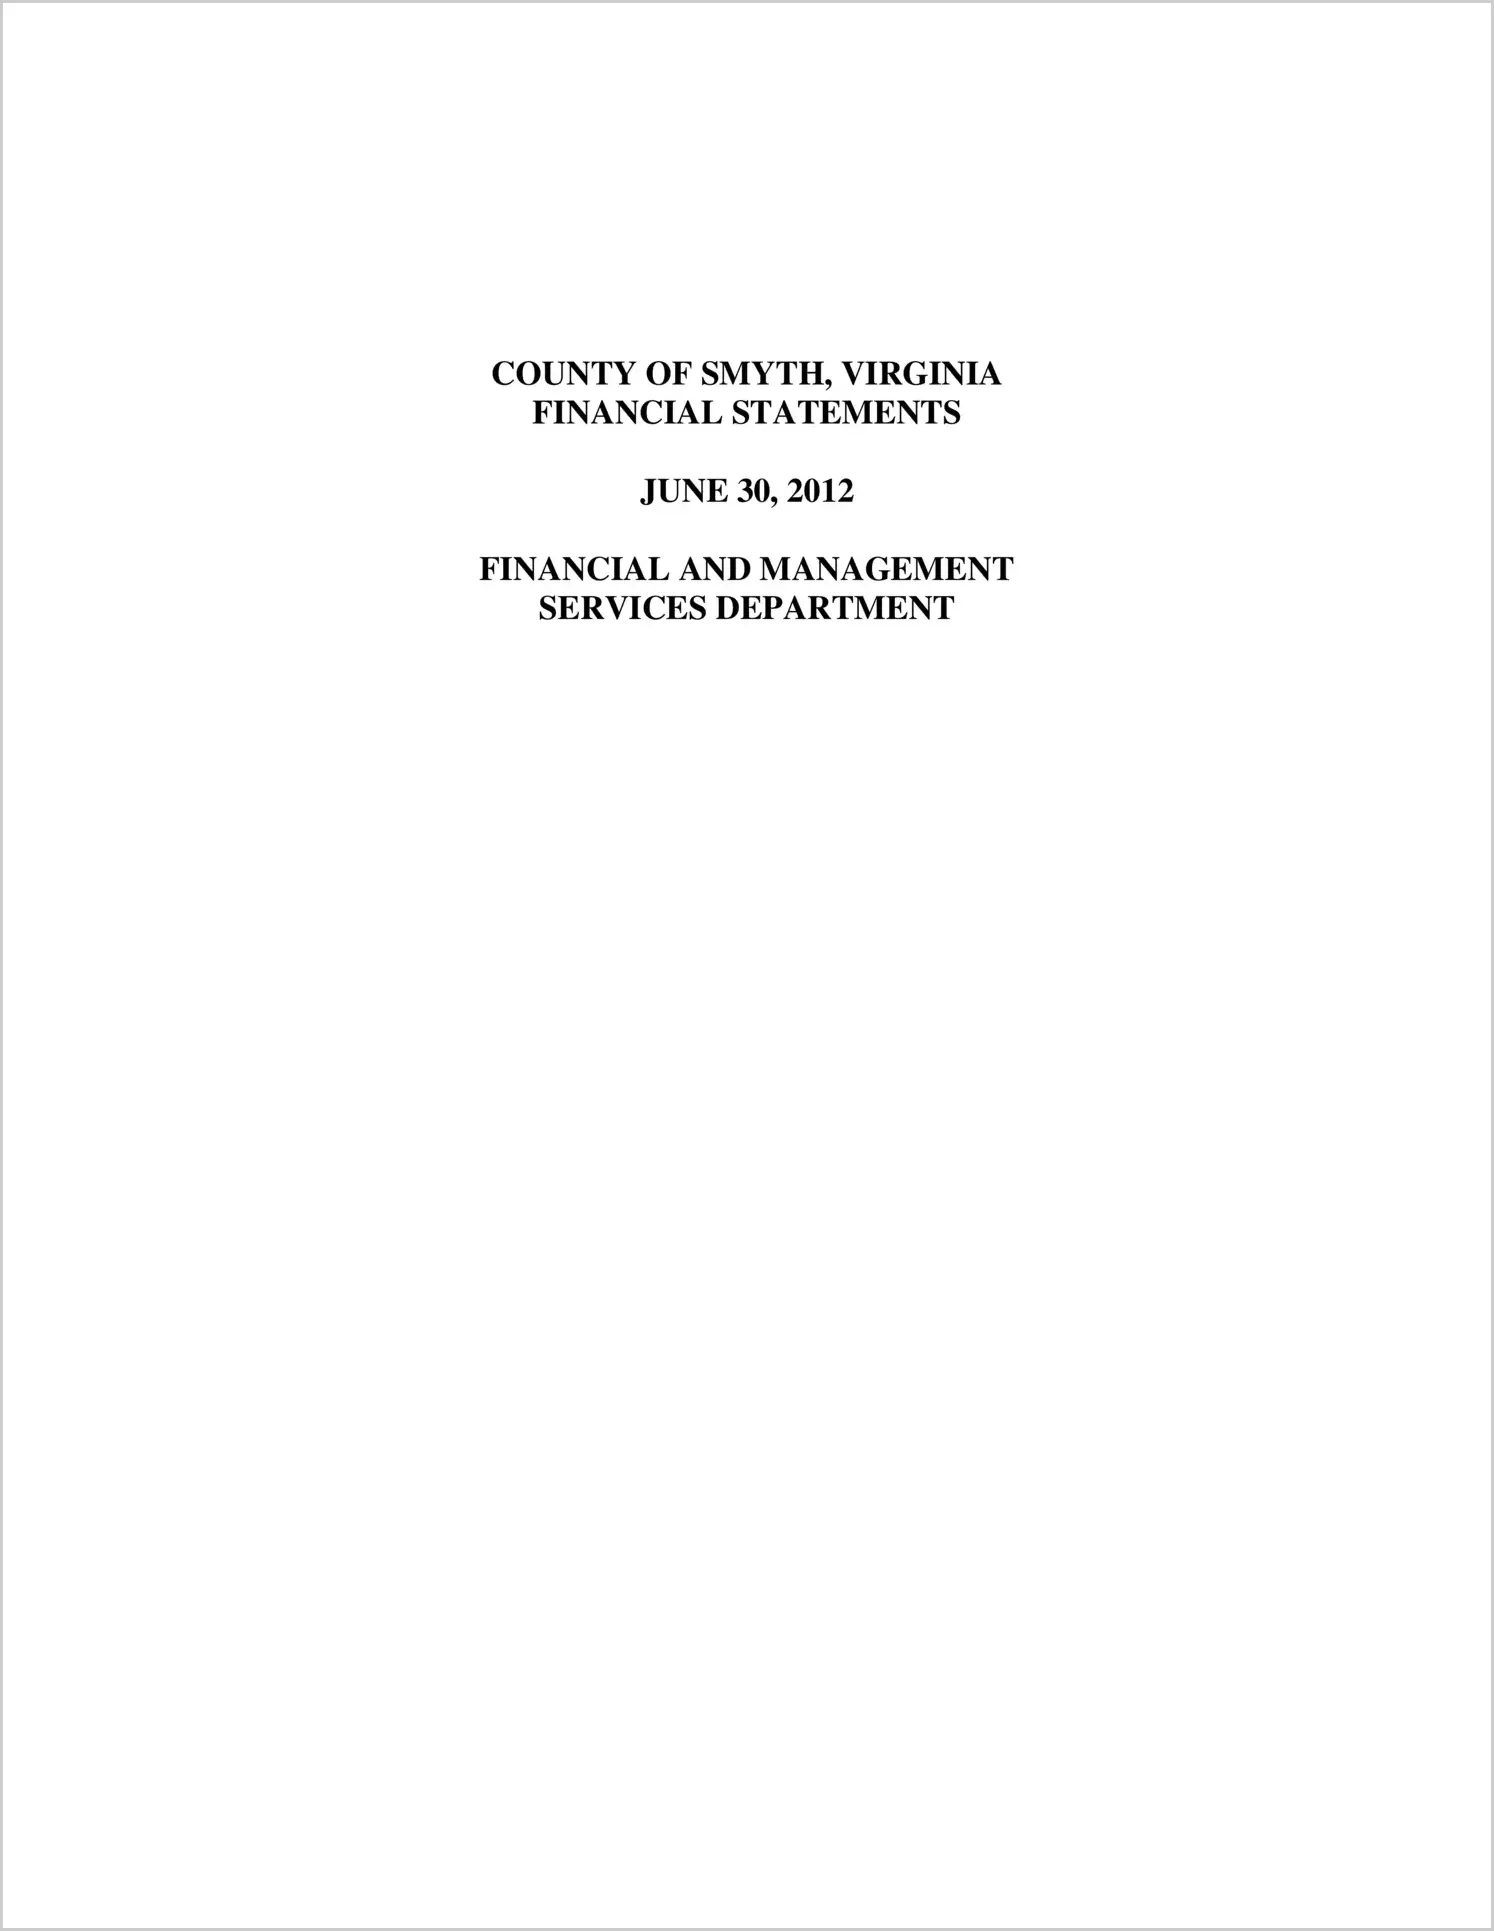 2012 Annual Financial Report for County of Smyth